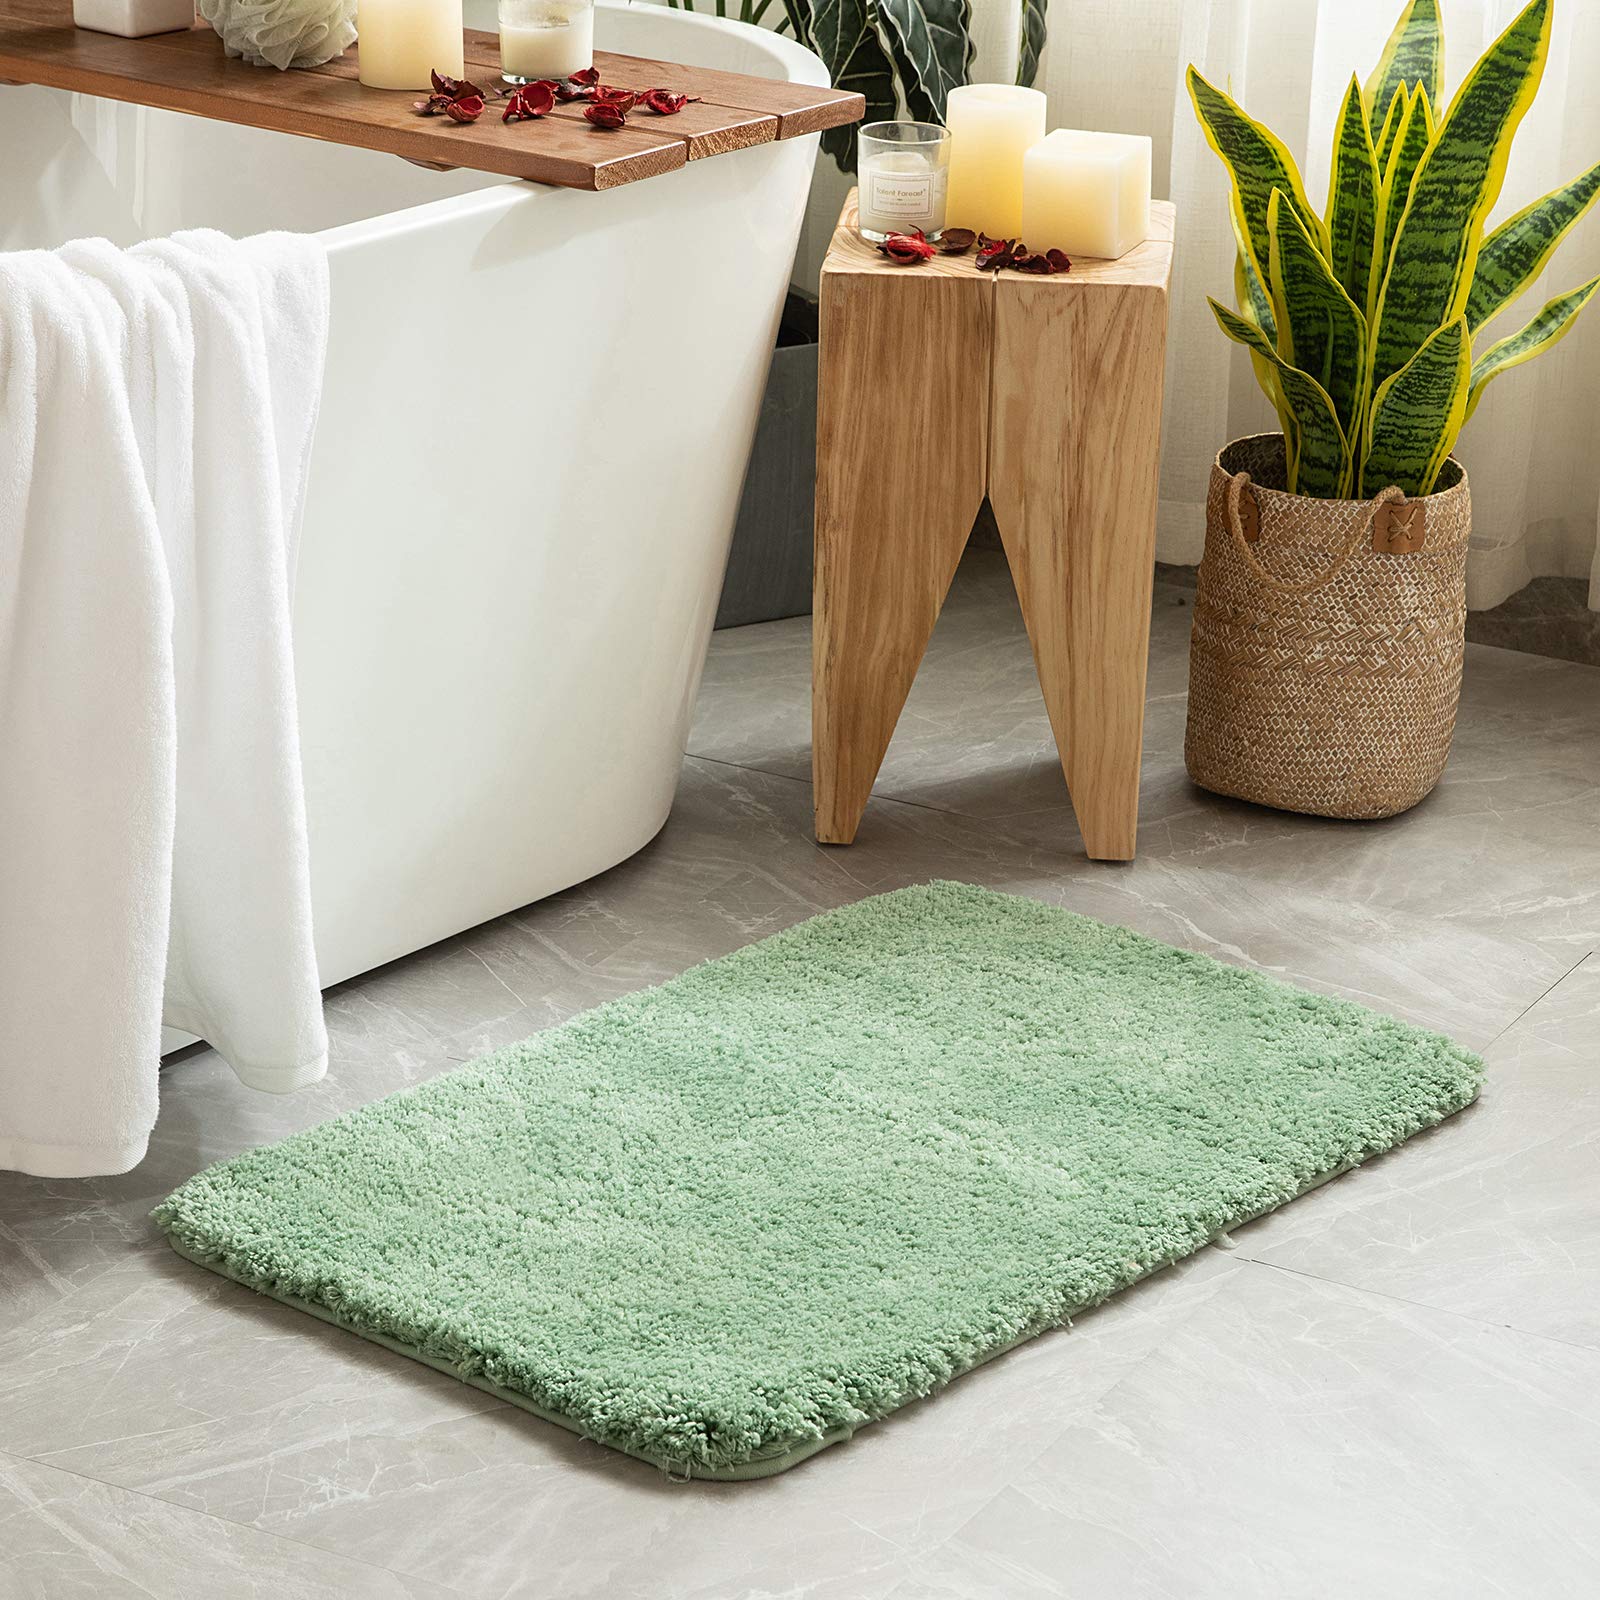 MIULEE 2pc 16''x24'' Bath Mats and 24''x44'' Runner Rugs, Non Slip Shaggy Absorbent Bathroom Rugs Set 3 Pieces, Green